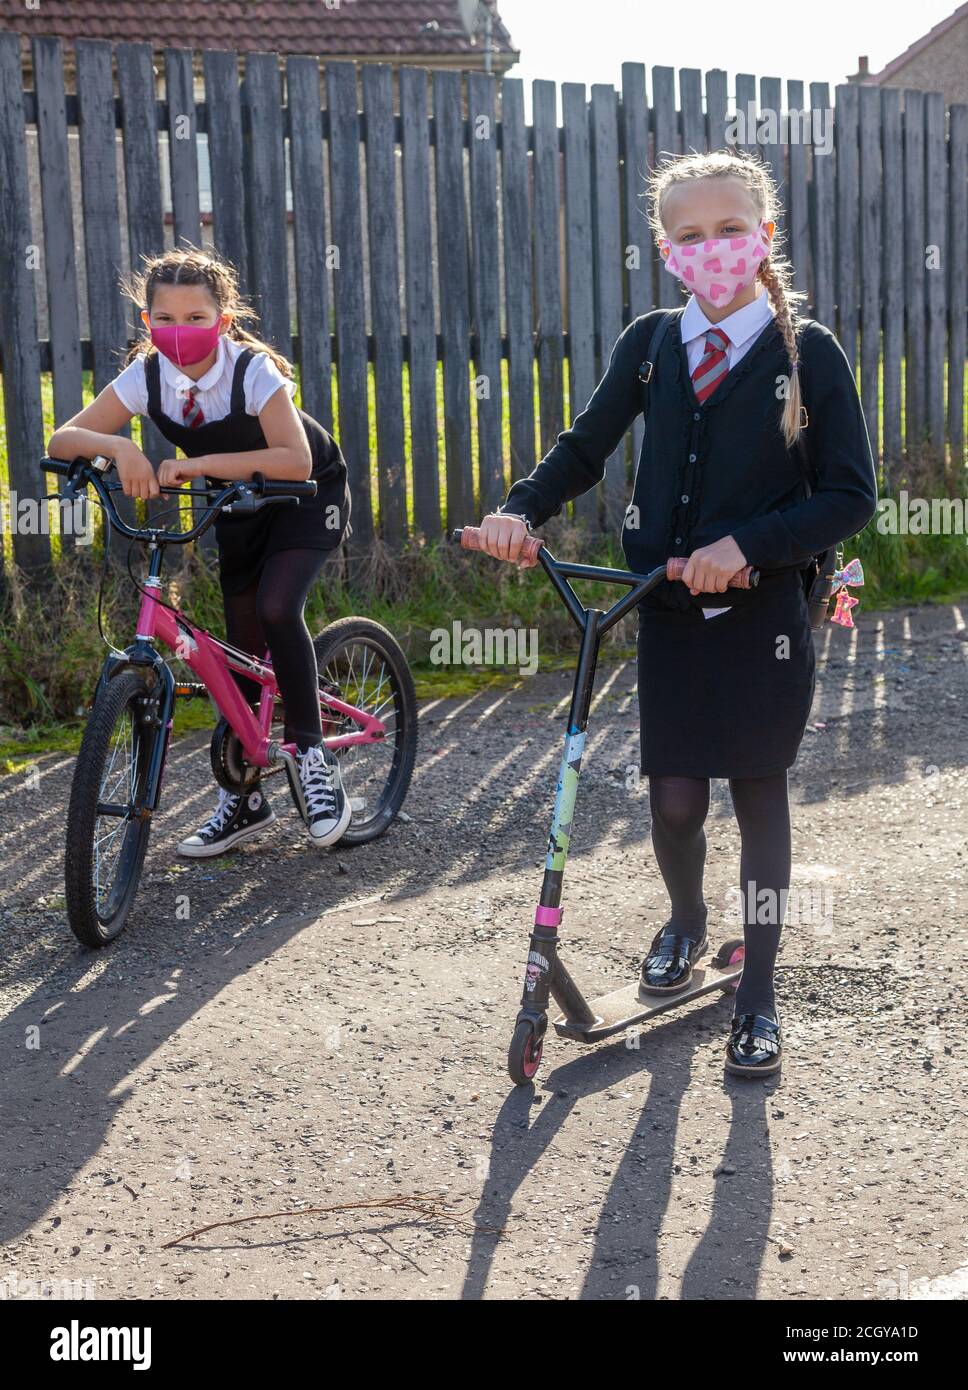 Two ten year old schoolgirls in school uniform one on a bike and the other on a scooter both wearing face masks. Stock Photo